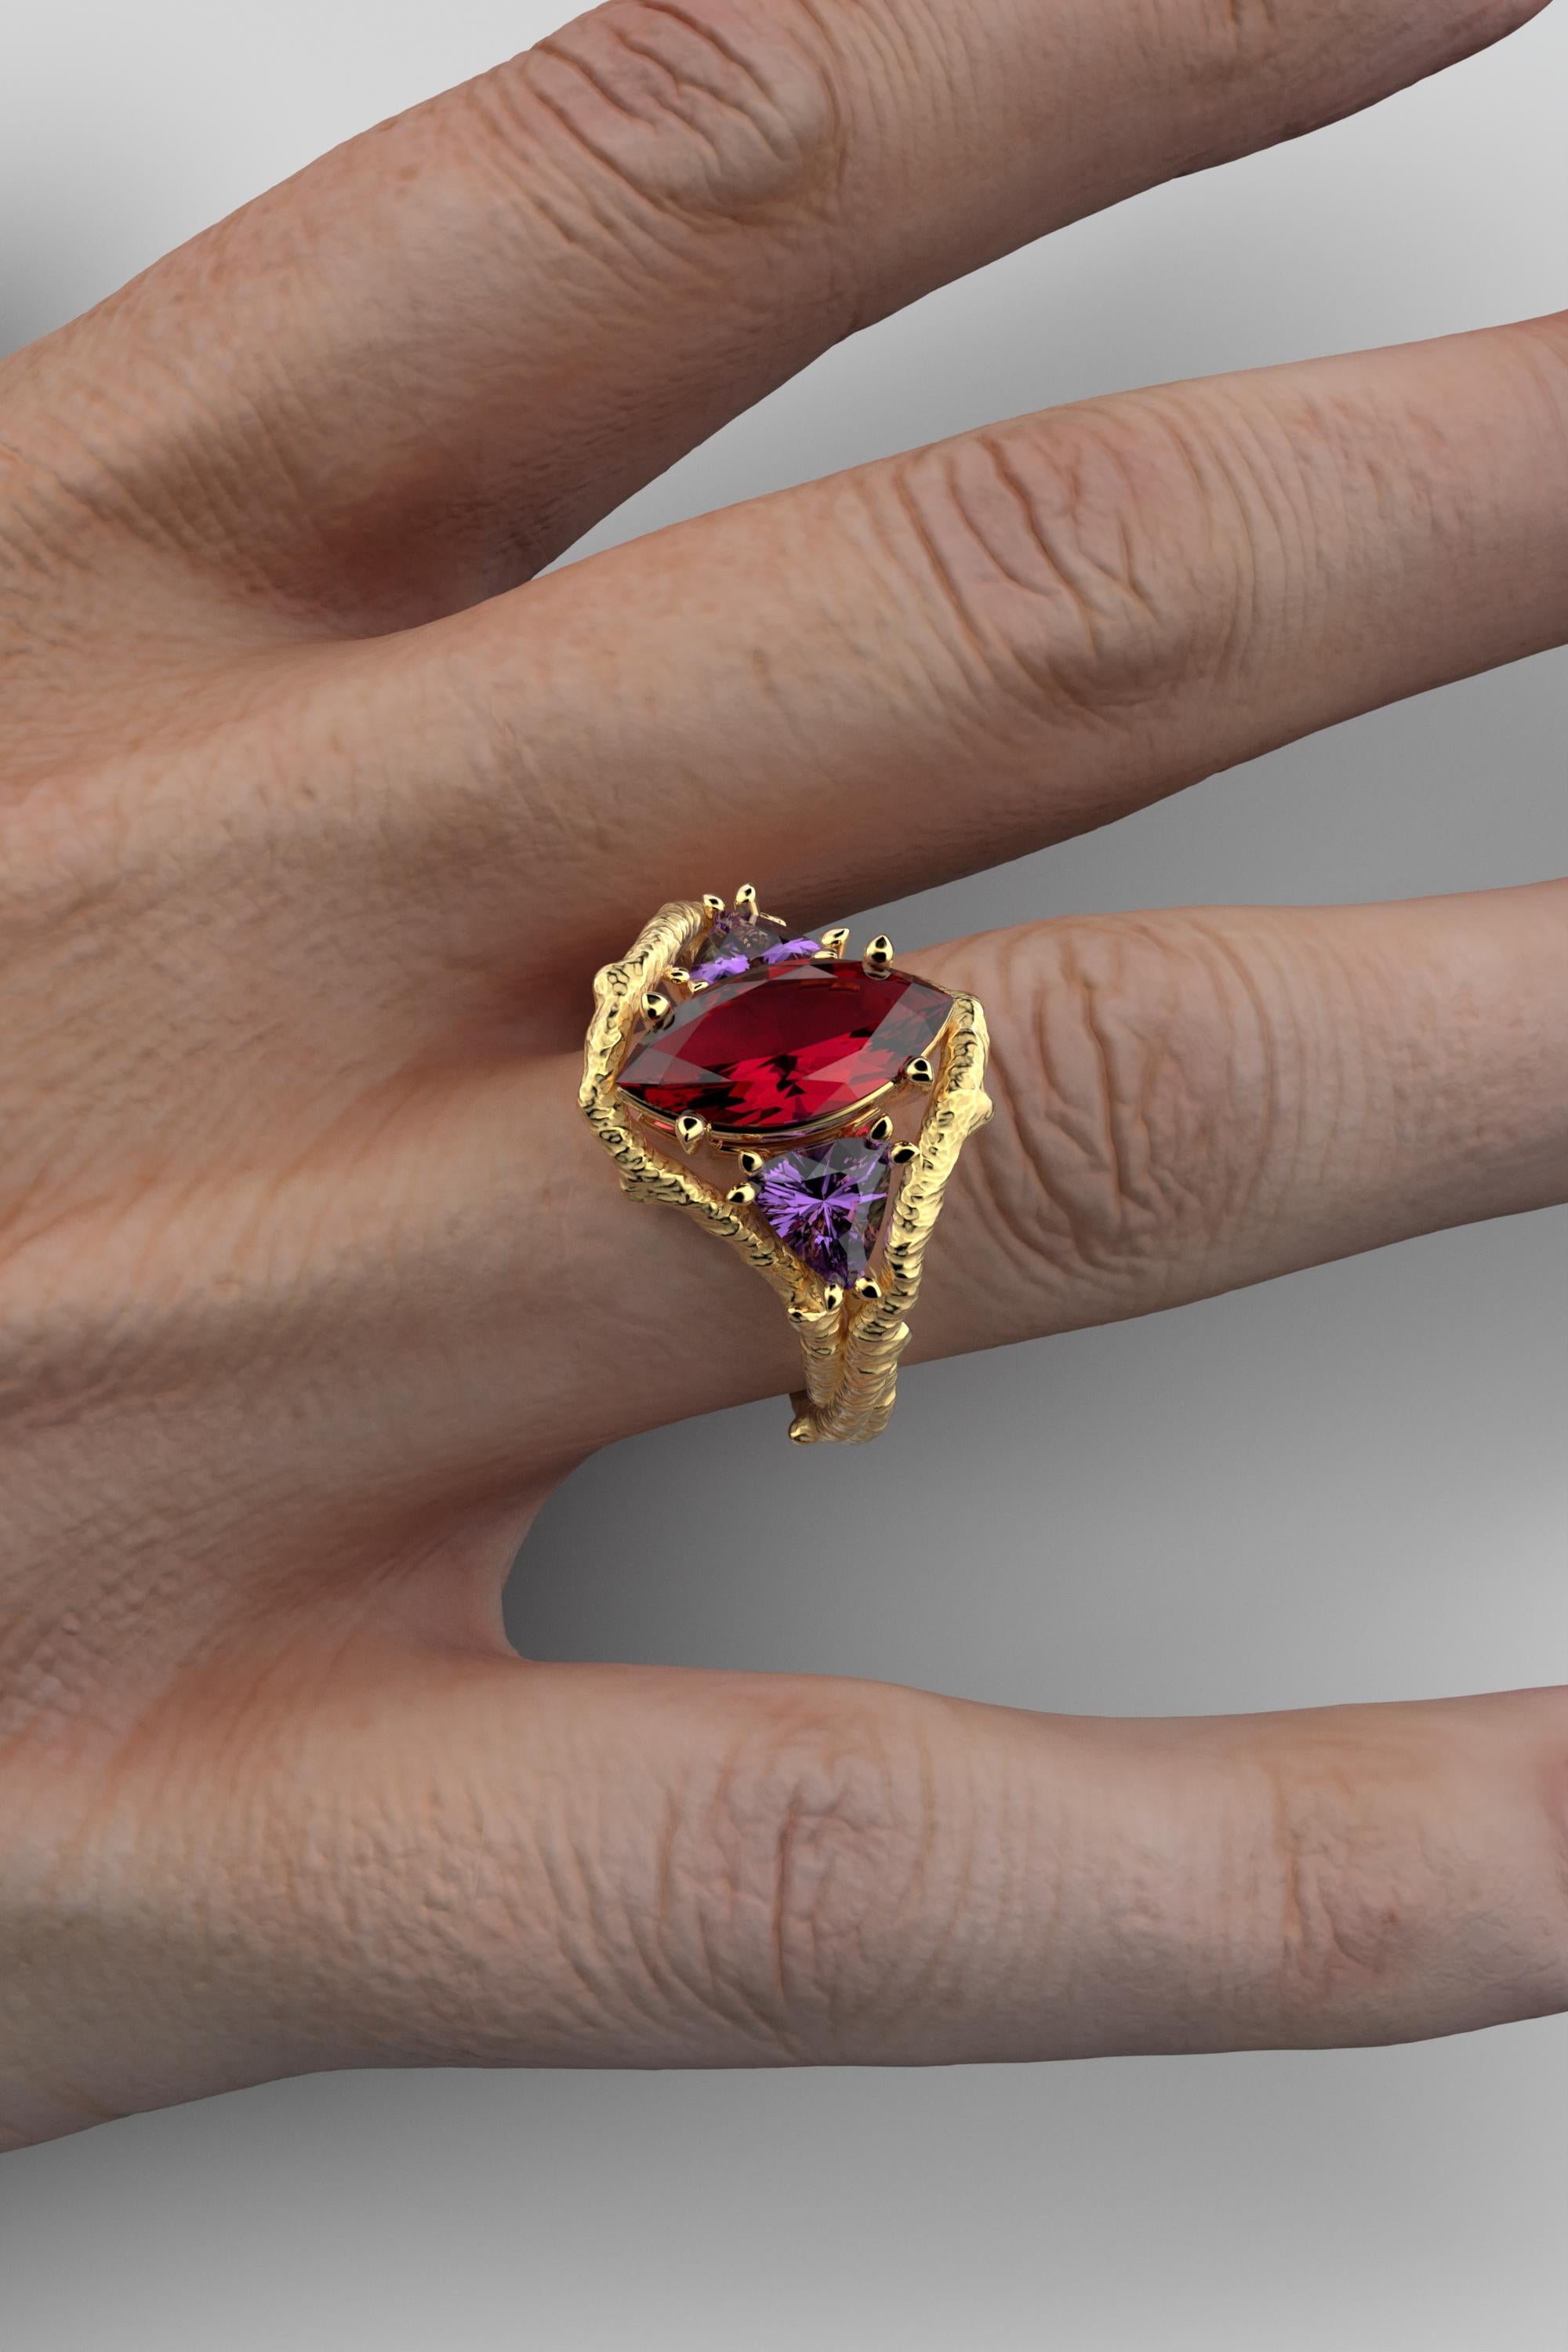 For Sale:  Nature Inspired 18k Solid Gold Gemstone Ring Made in Italy by Oltremare Gioielli 6